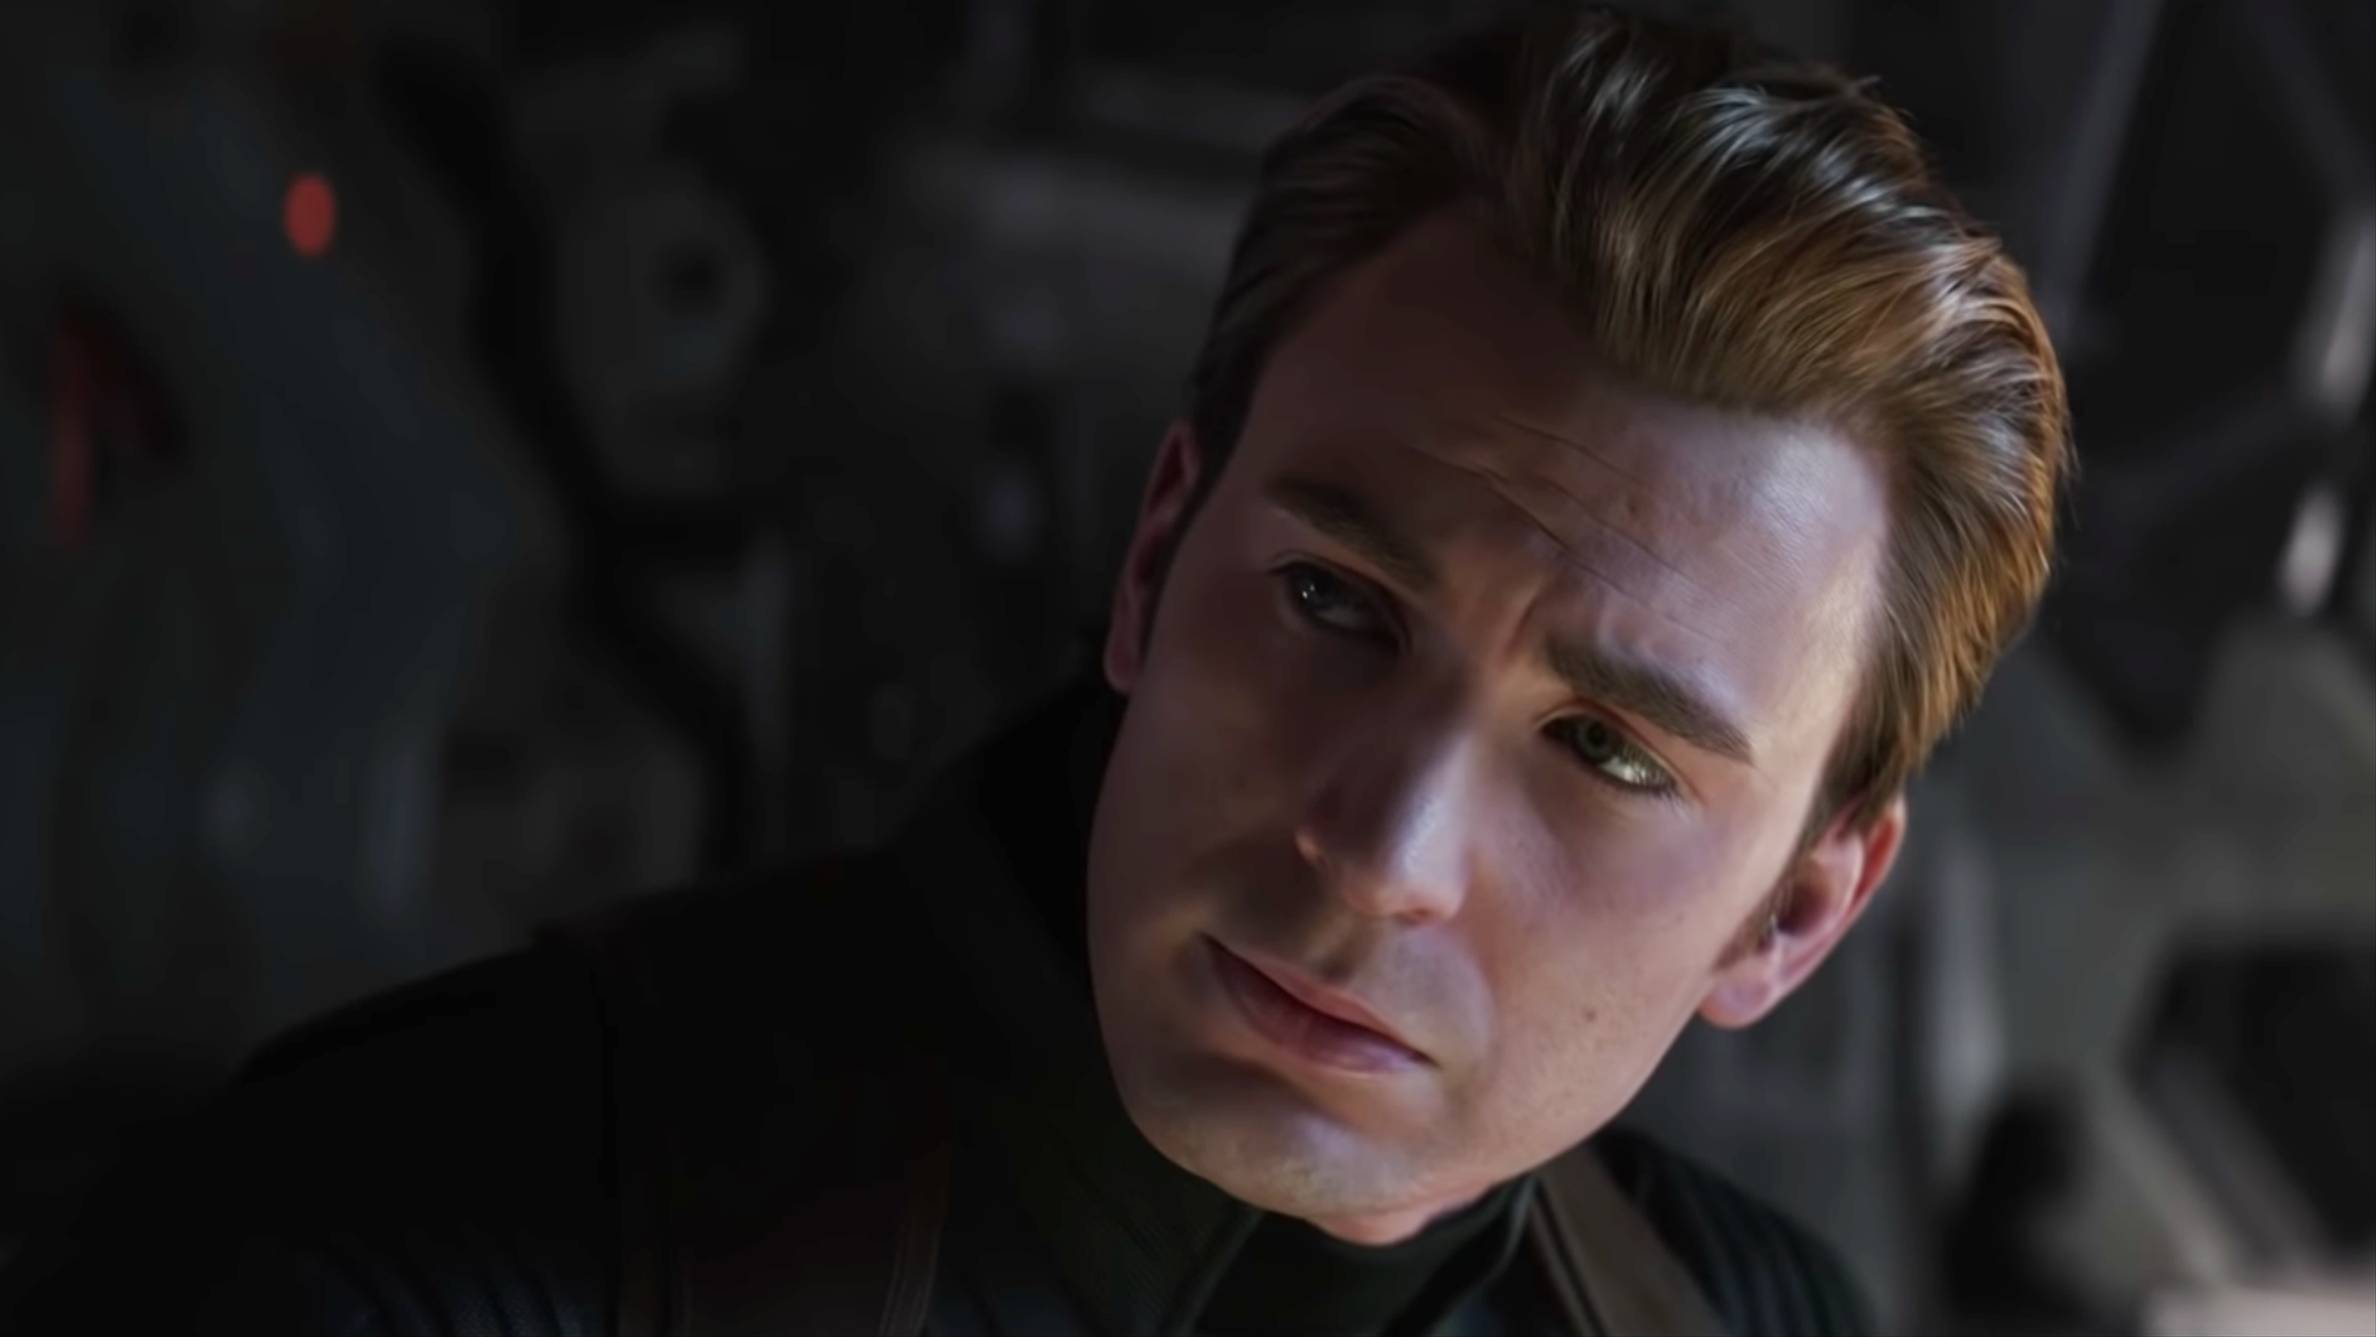 Avengers: Endgame' Runtime Compared to Other Marvel Movies